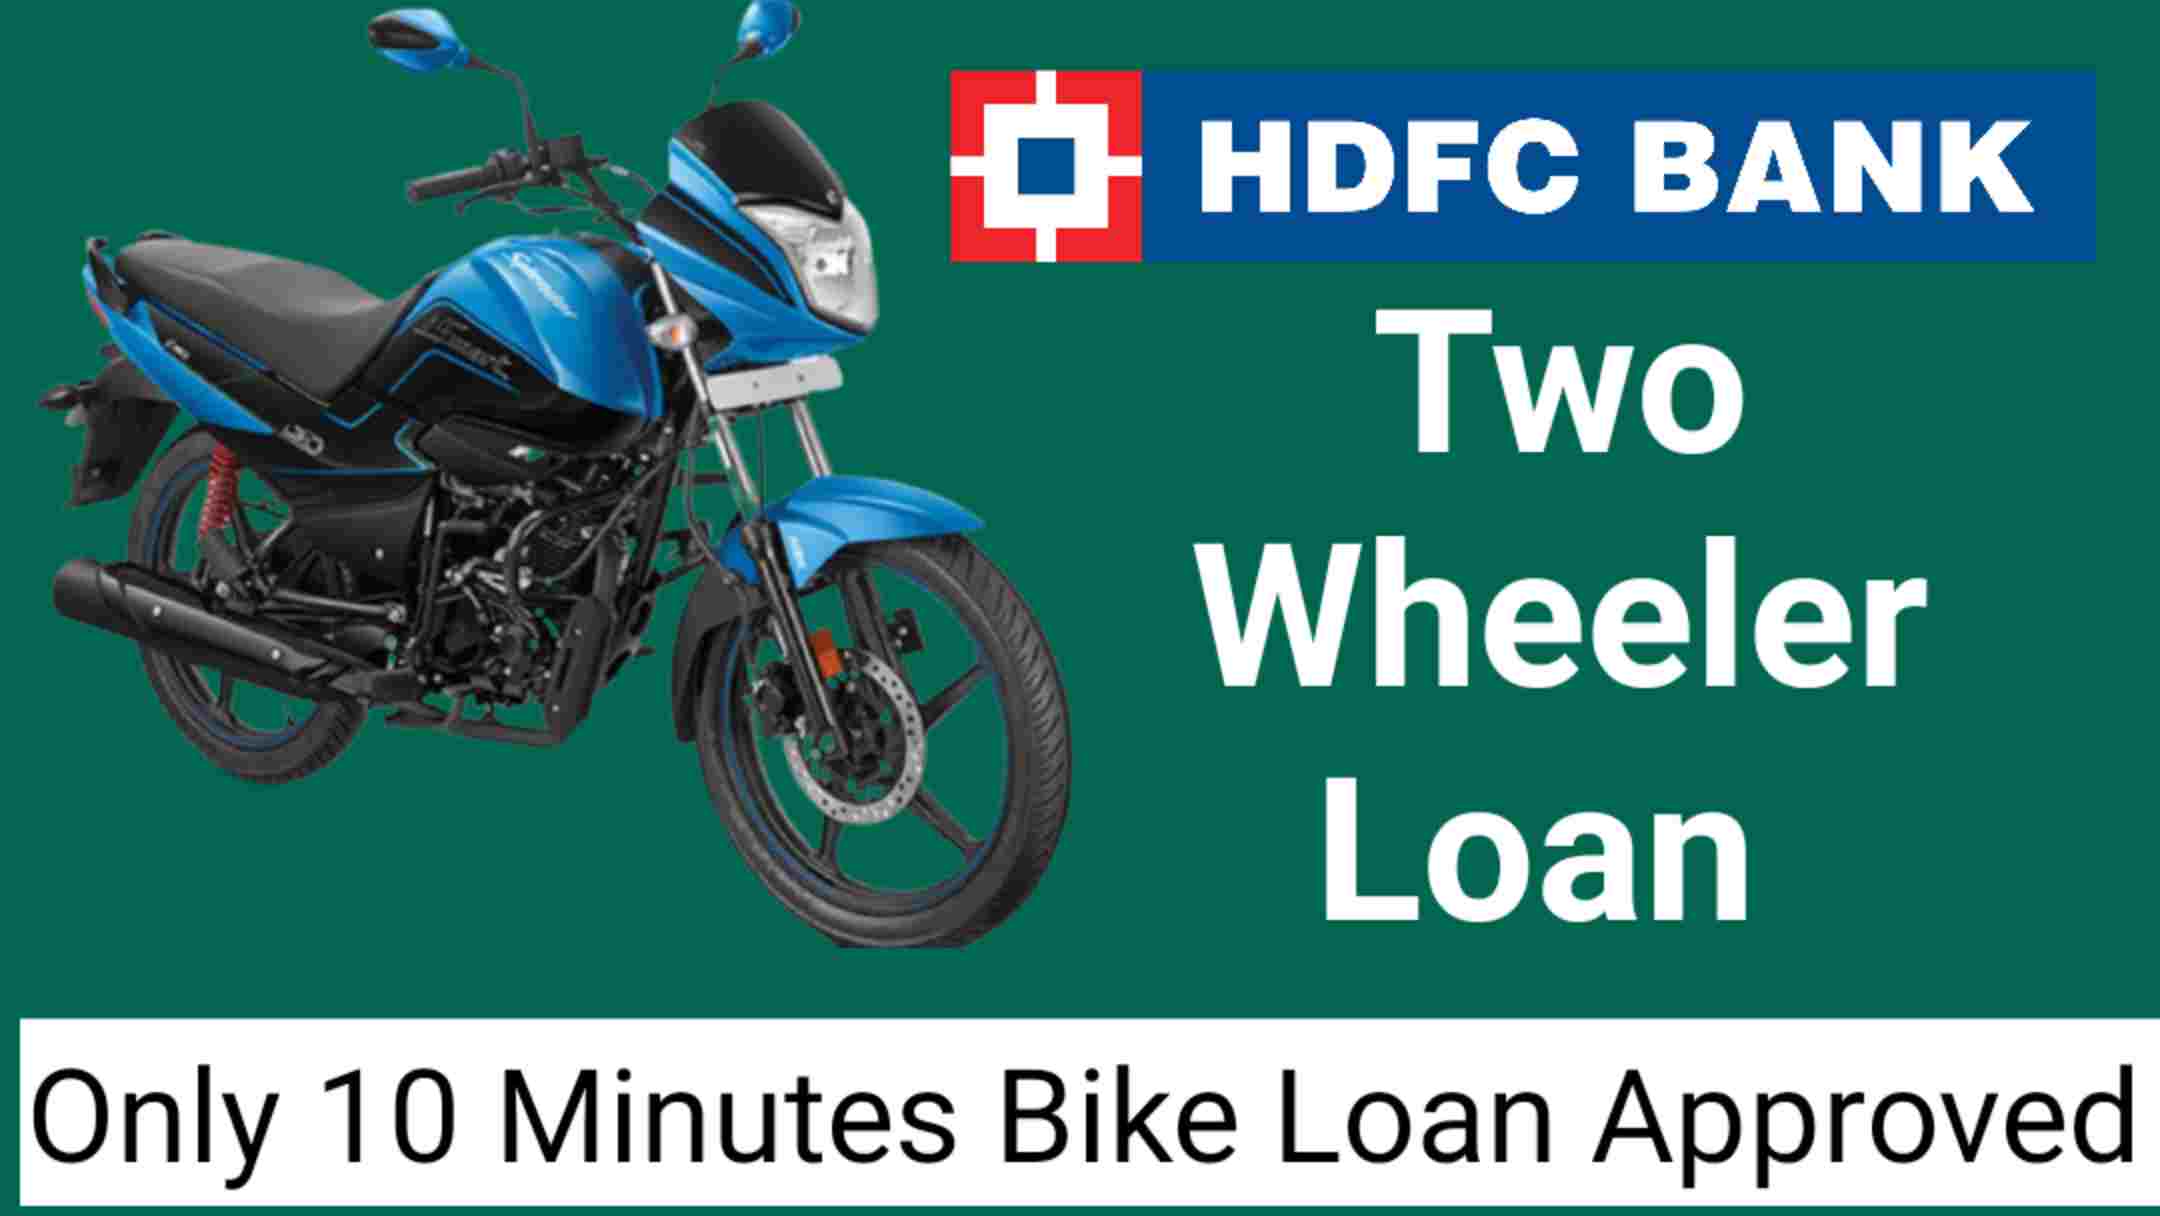 How to Apply HDFC Bike Loan Only in 10 Minutes to  Approved/